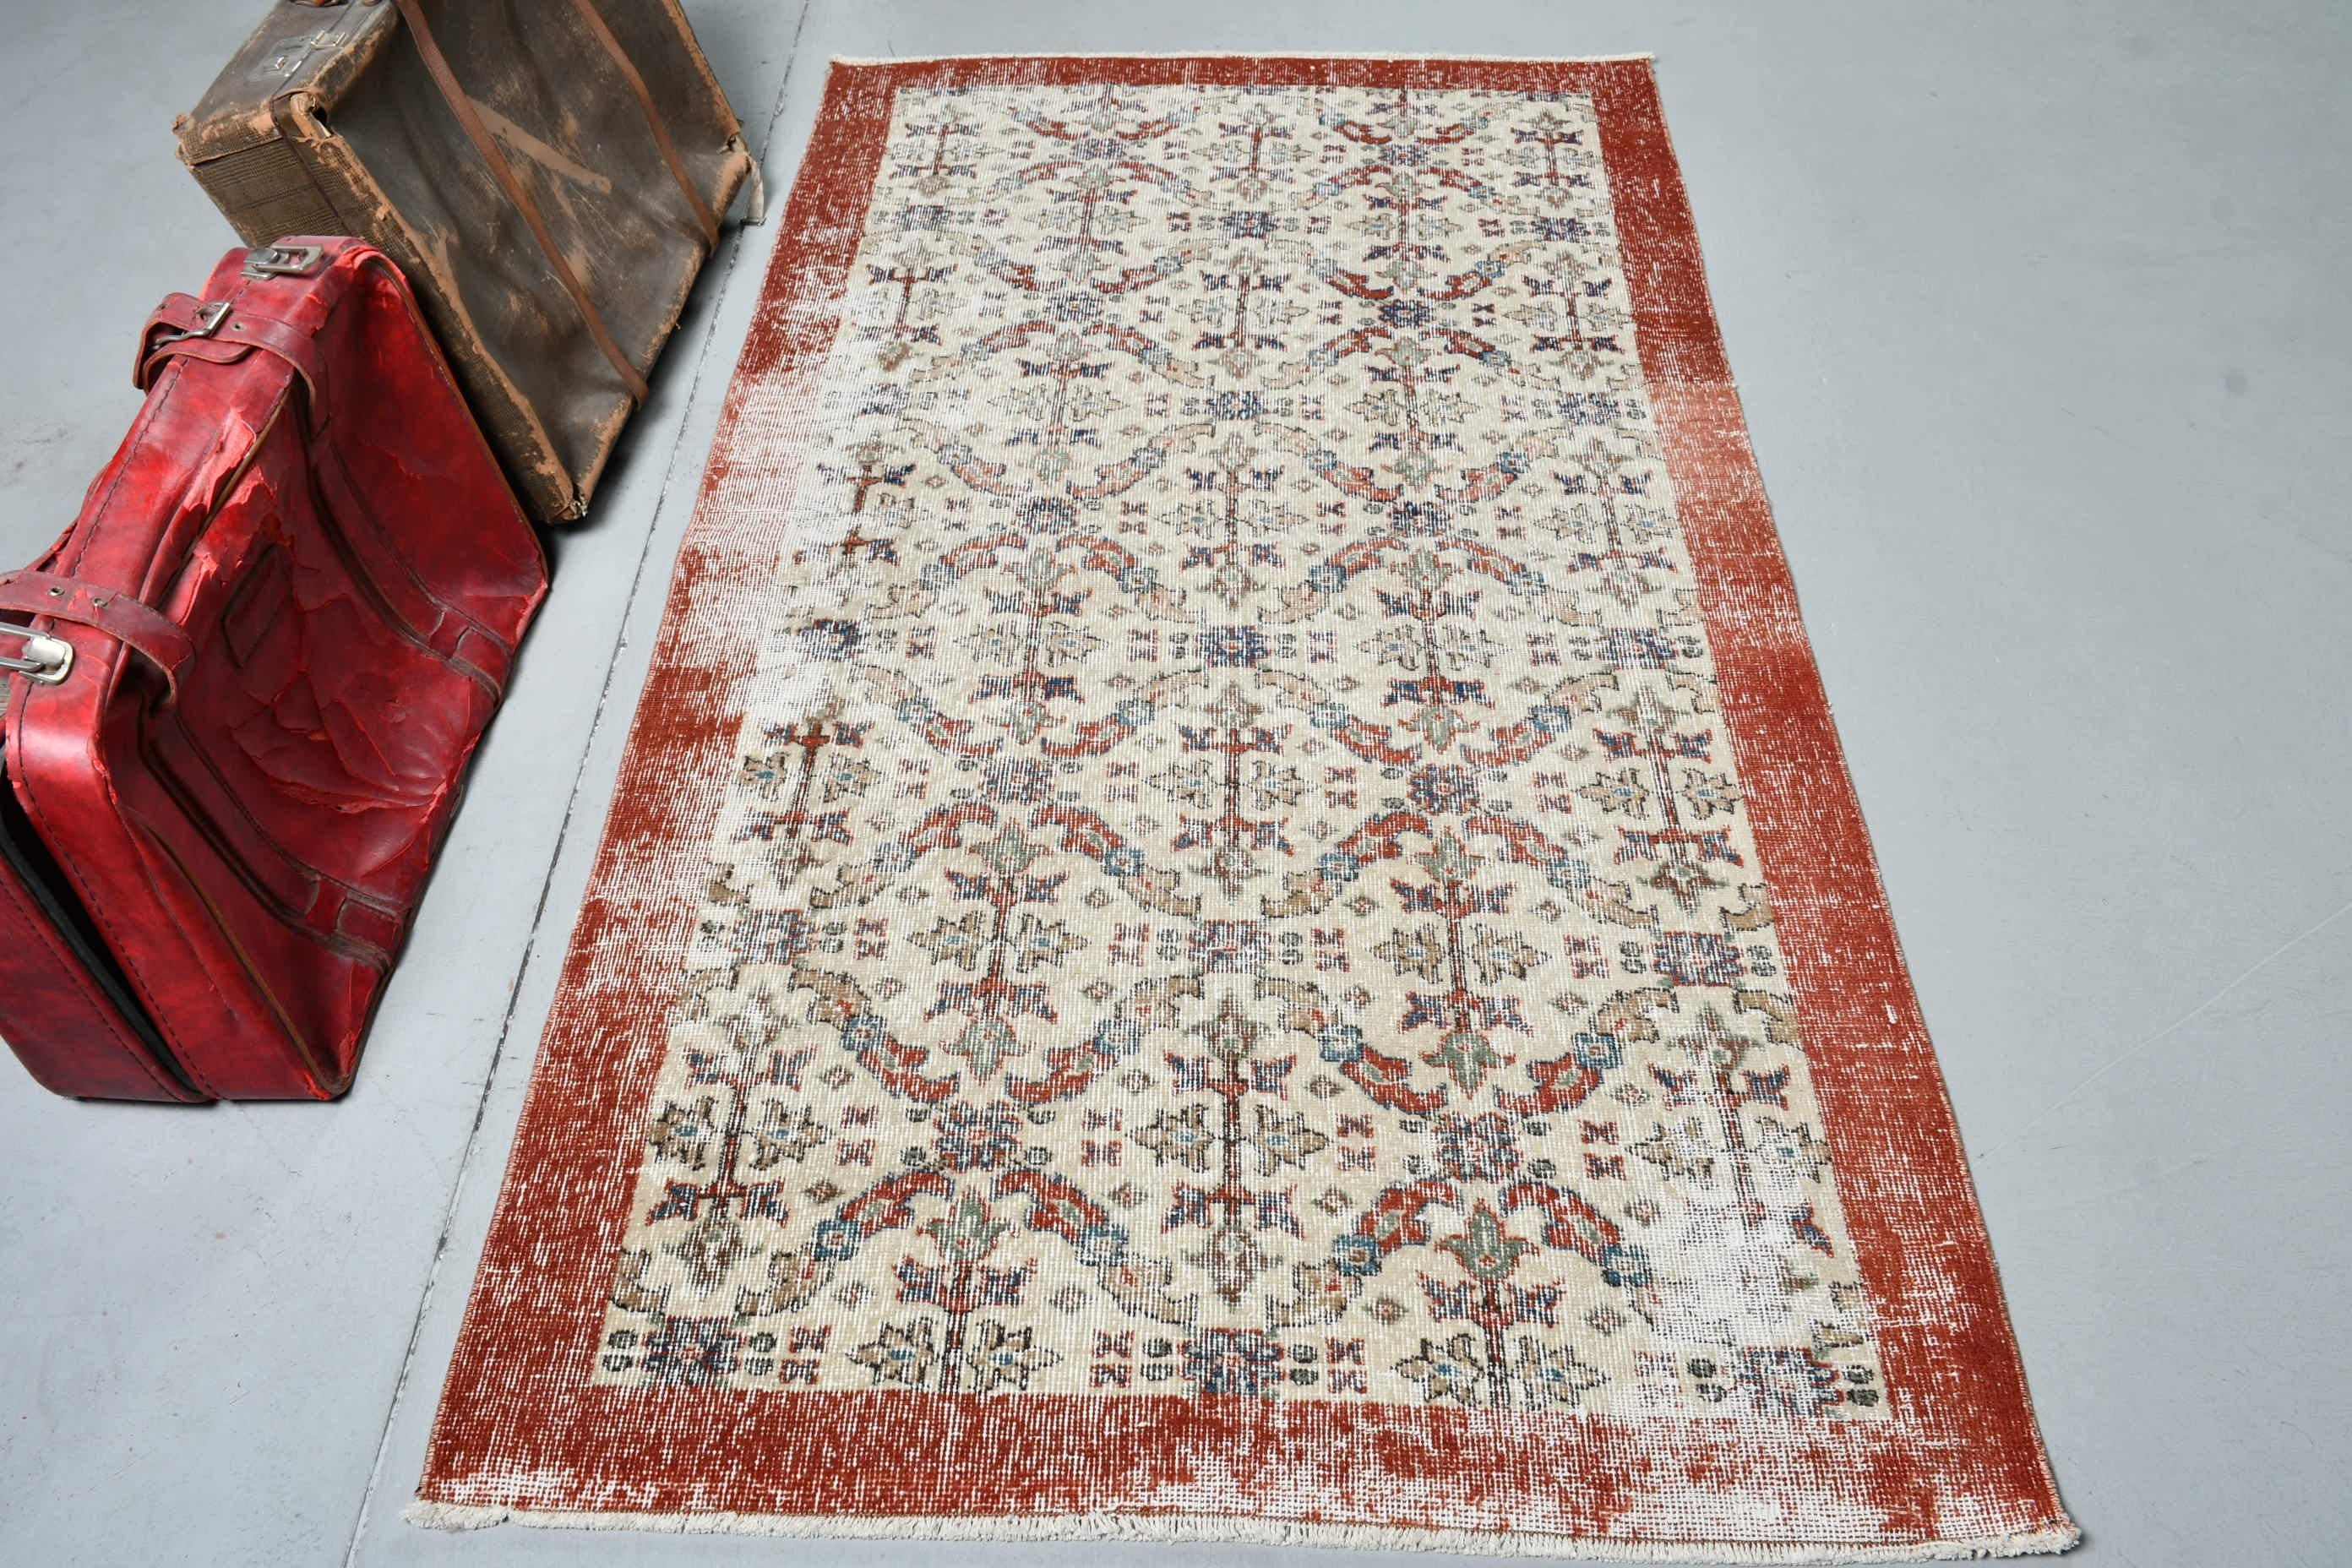 Entry Rugs, Moroccan Rugs, Kitchen Rugs, Antique Rugs, 3.6x6.6 ft Accent Rugs, Beige Antique Rugs, Turkish Rug, Flatweave Rug, Vintage Rugs